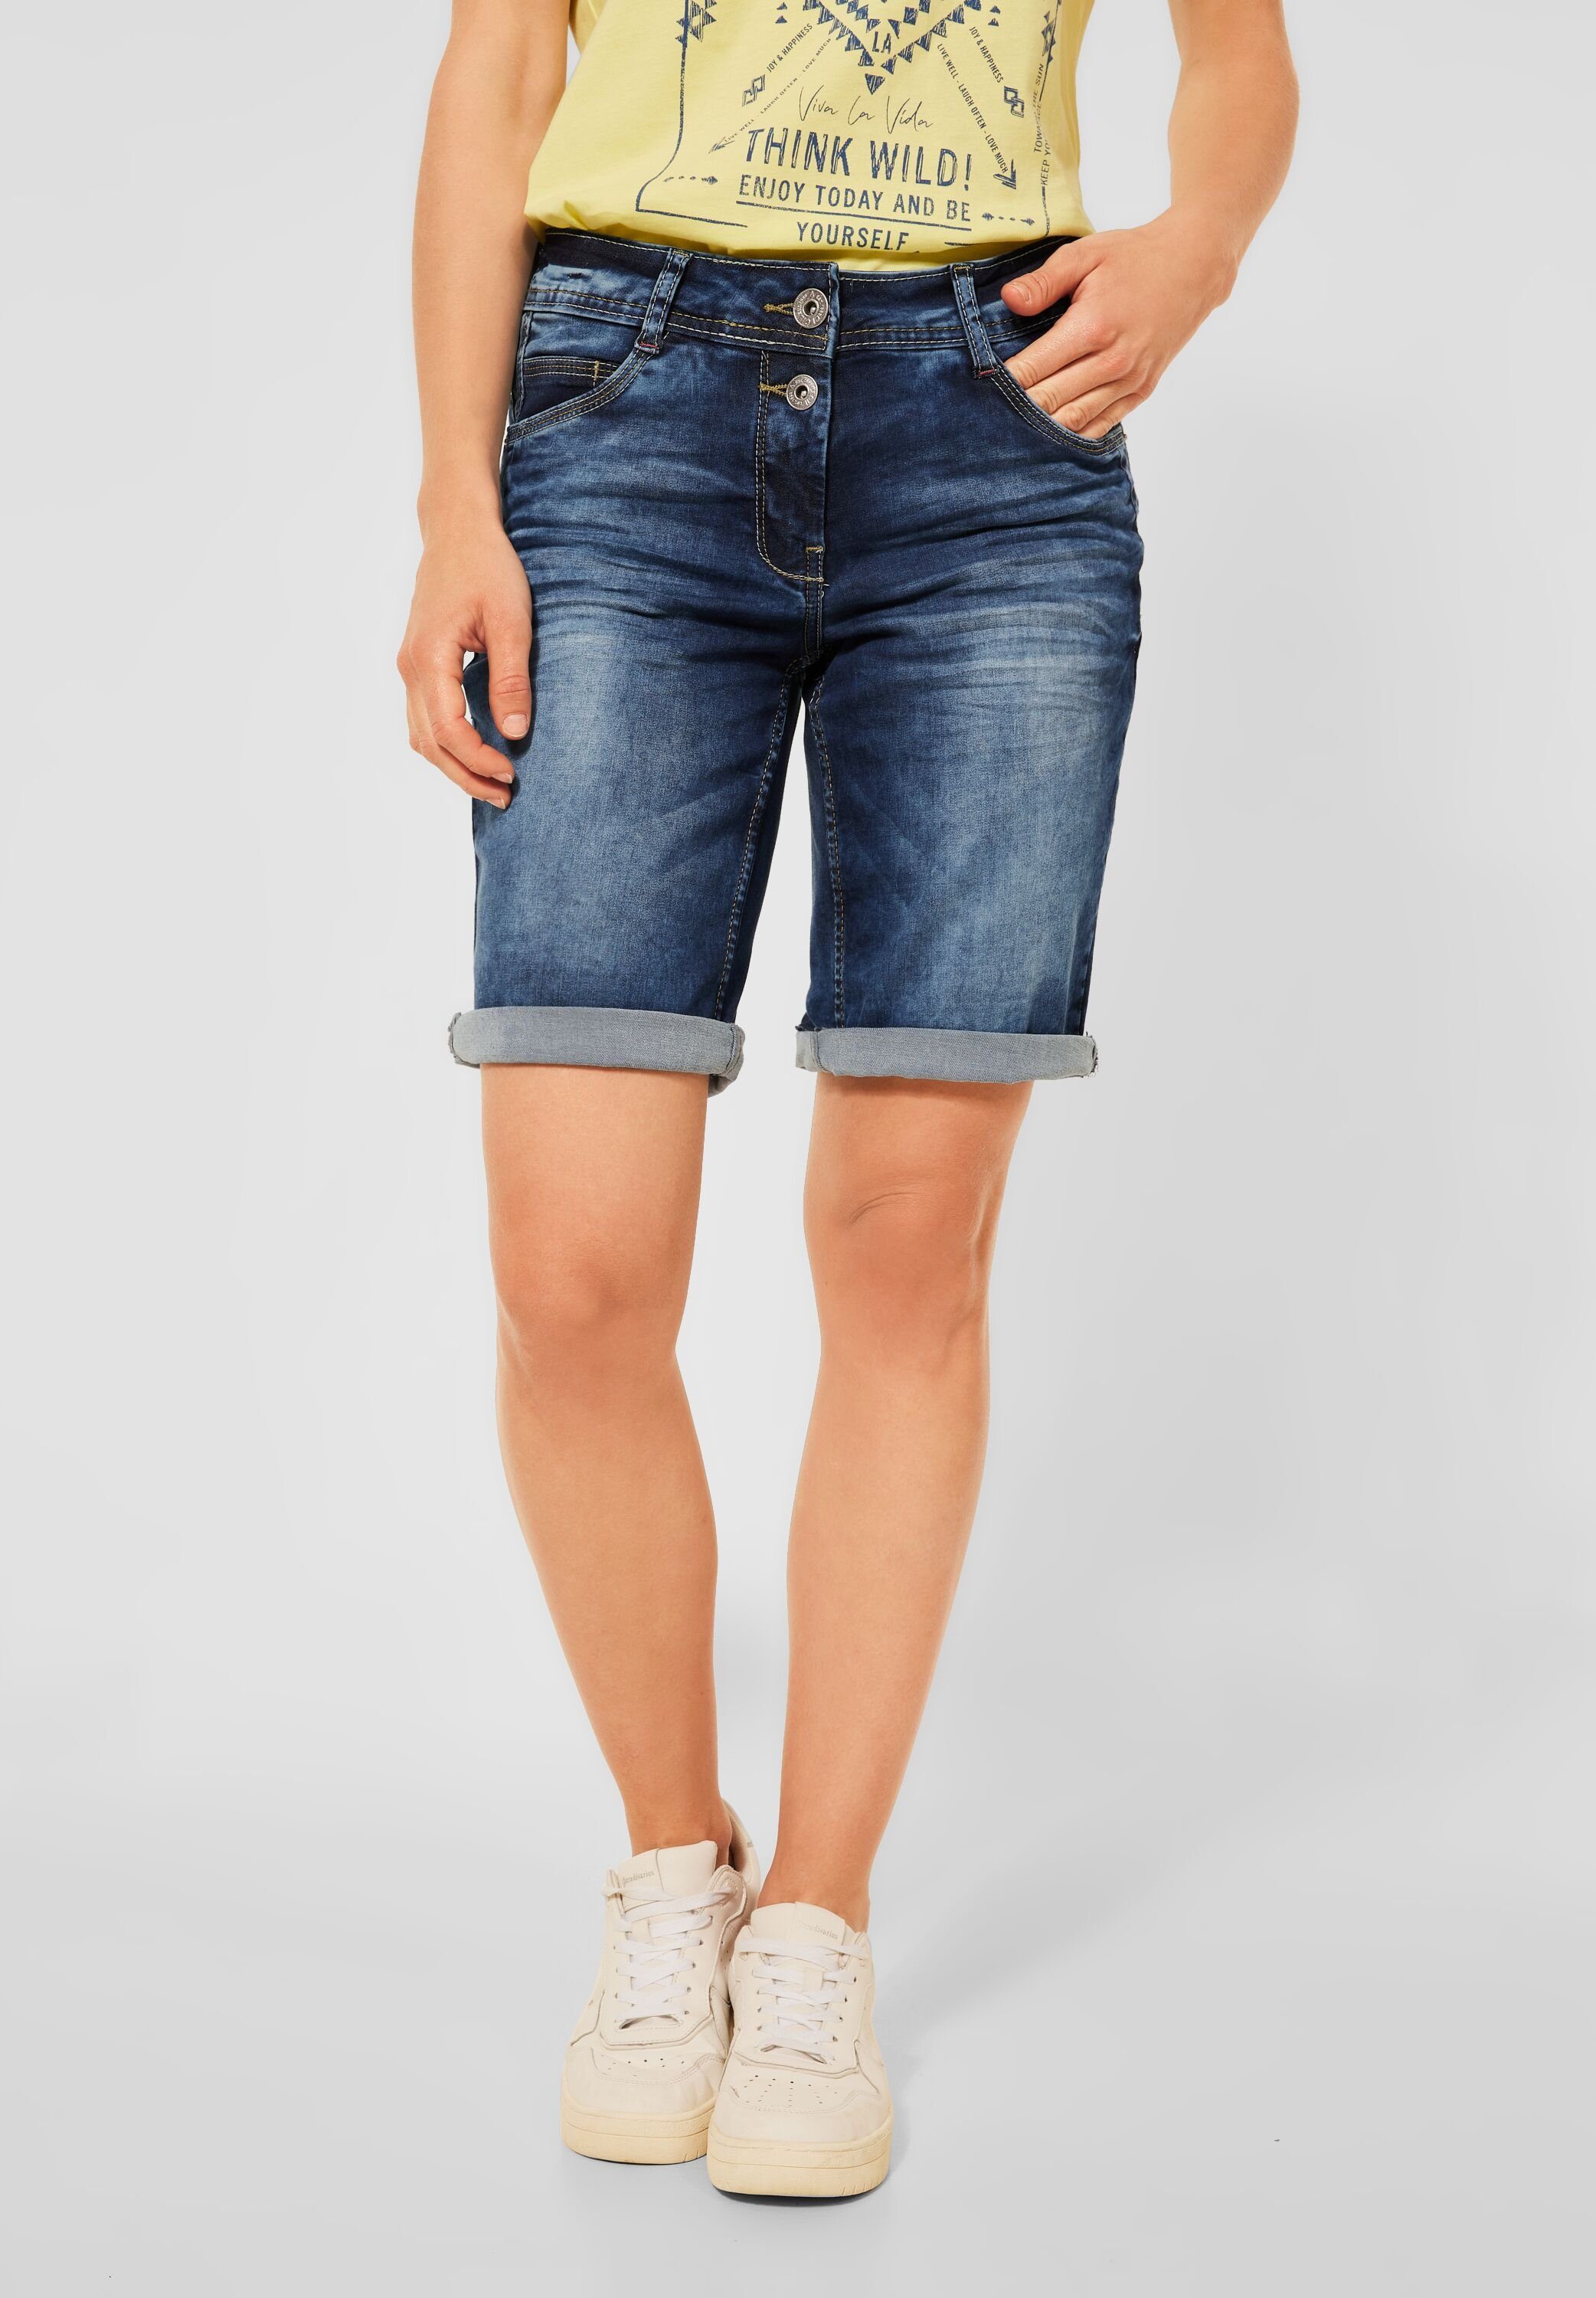 CECIL, Jeansshorts Shorts Cecil Mid Blue Jeansshorts Basicstyle Jeansshorts (1-tlg) Scarlett Jeans Five Denimstyle Loose in Cecil von in einem Pockets, Wash Fit